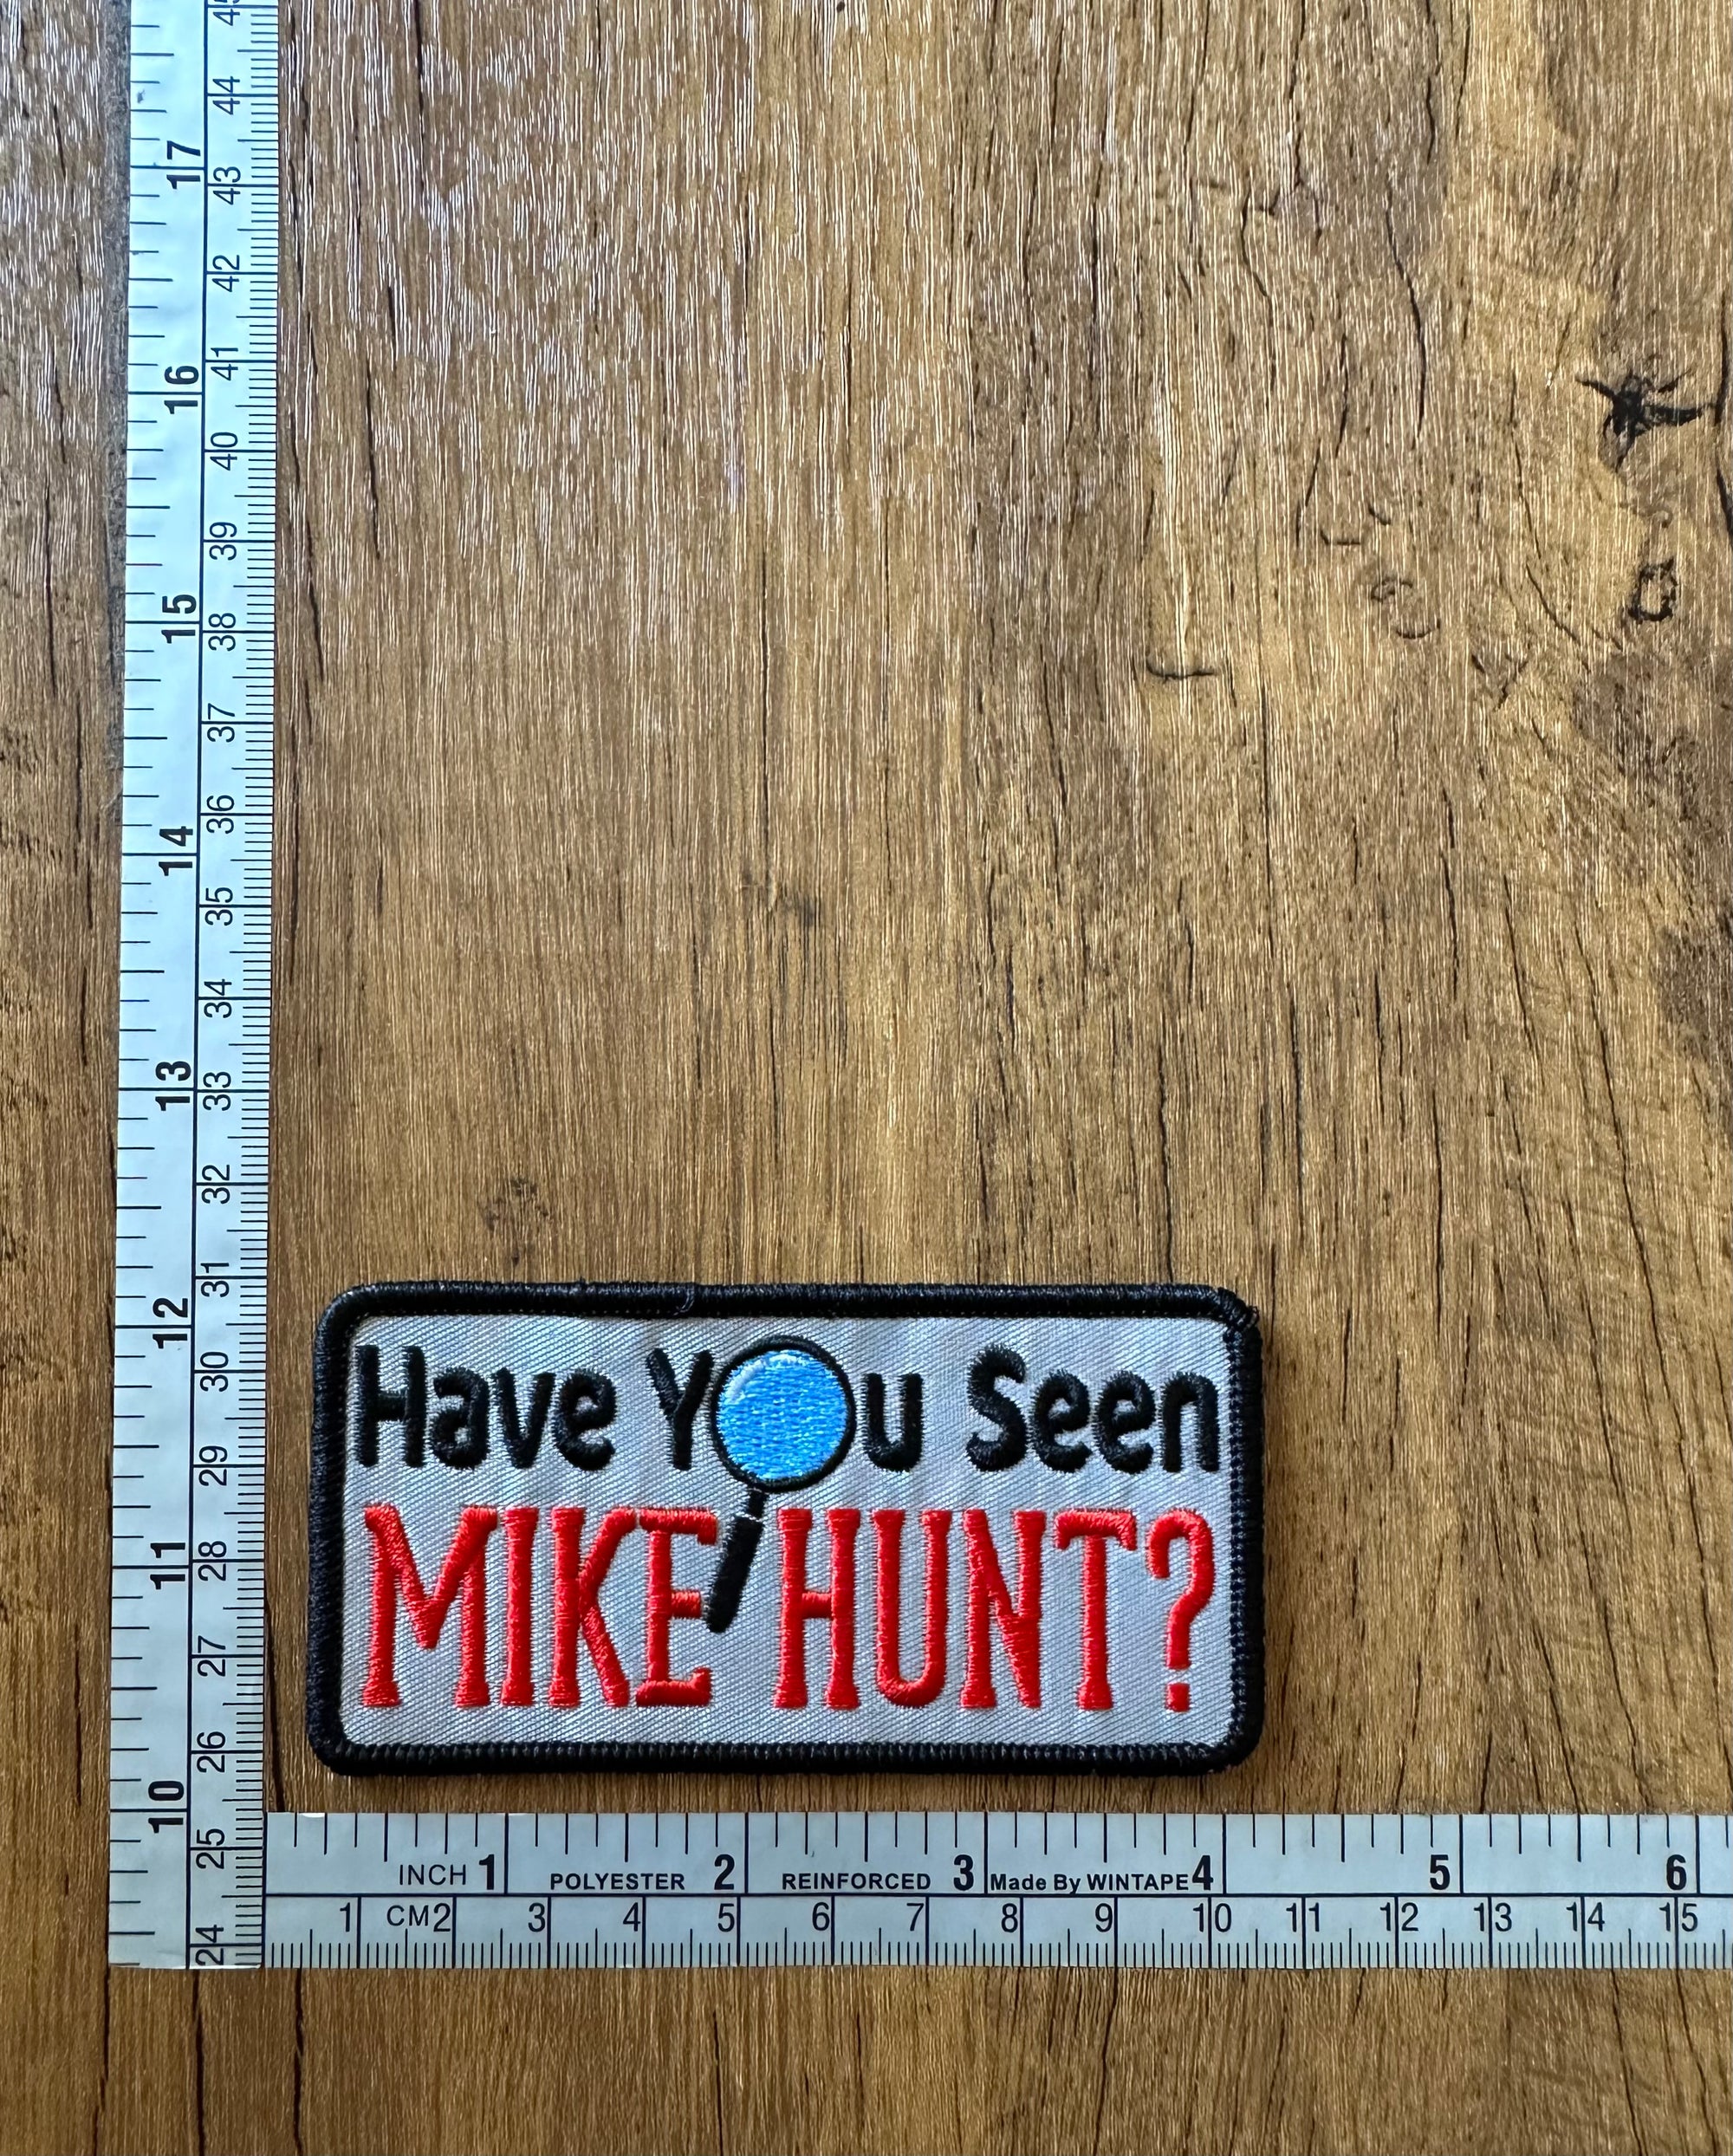 Have You Seen Mike Hunt?